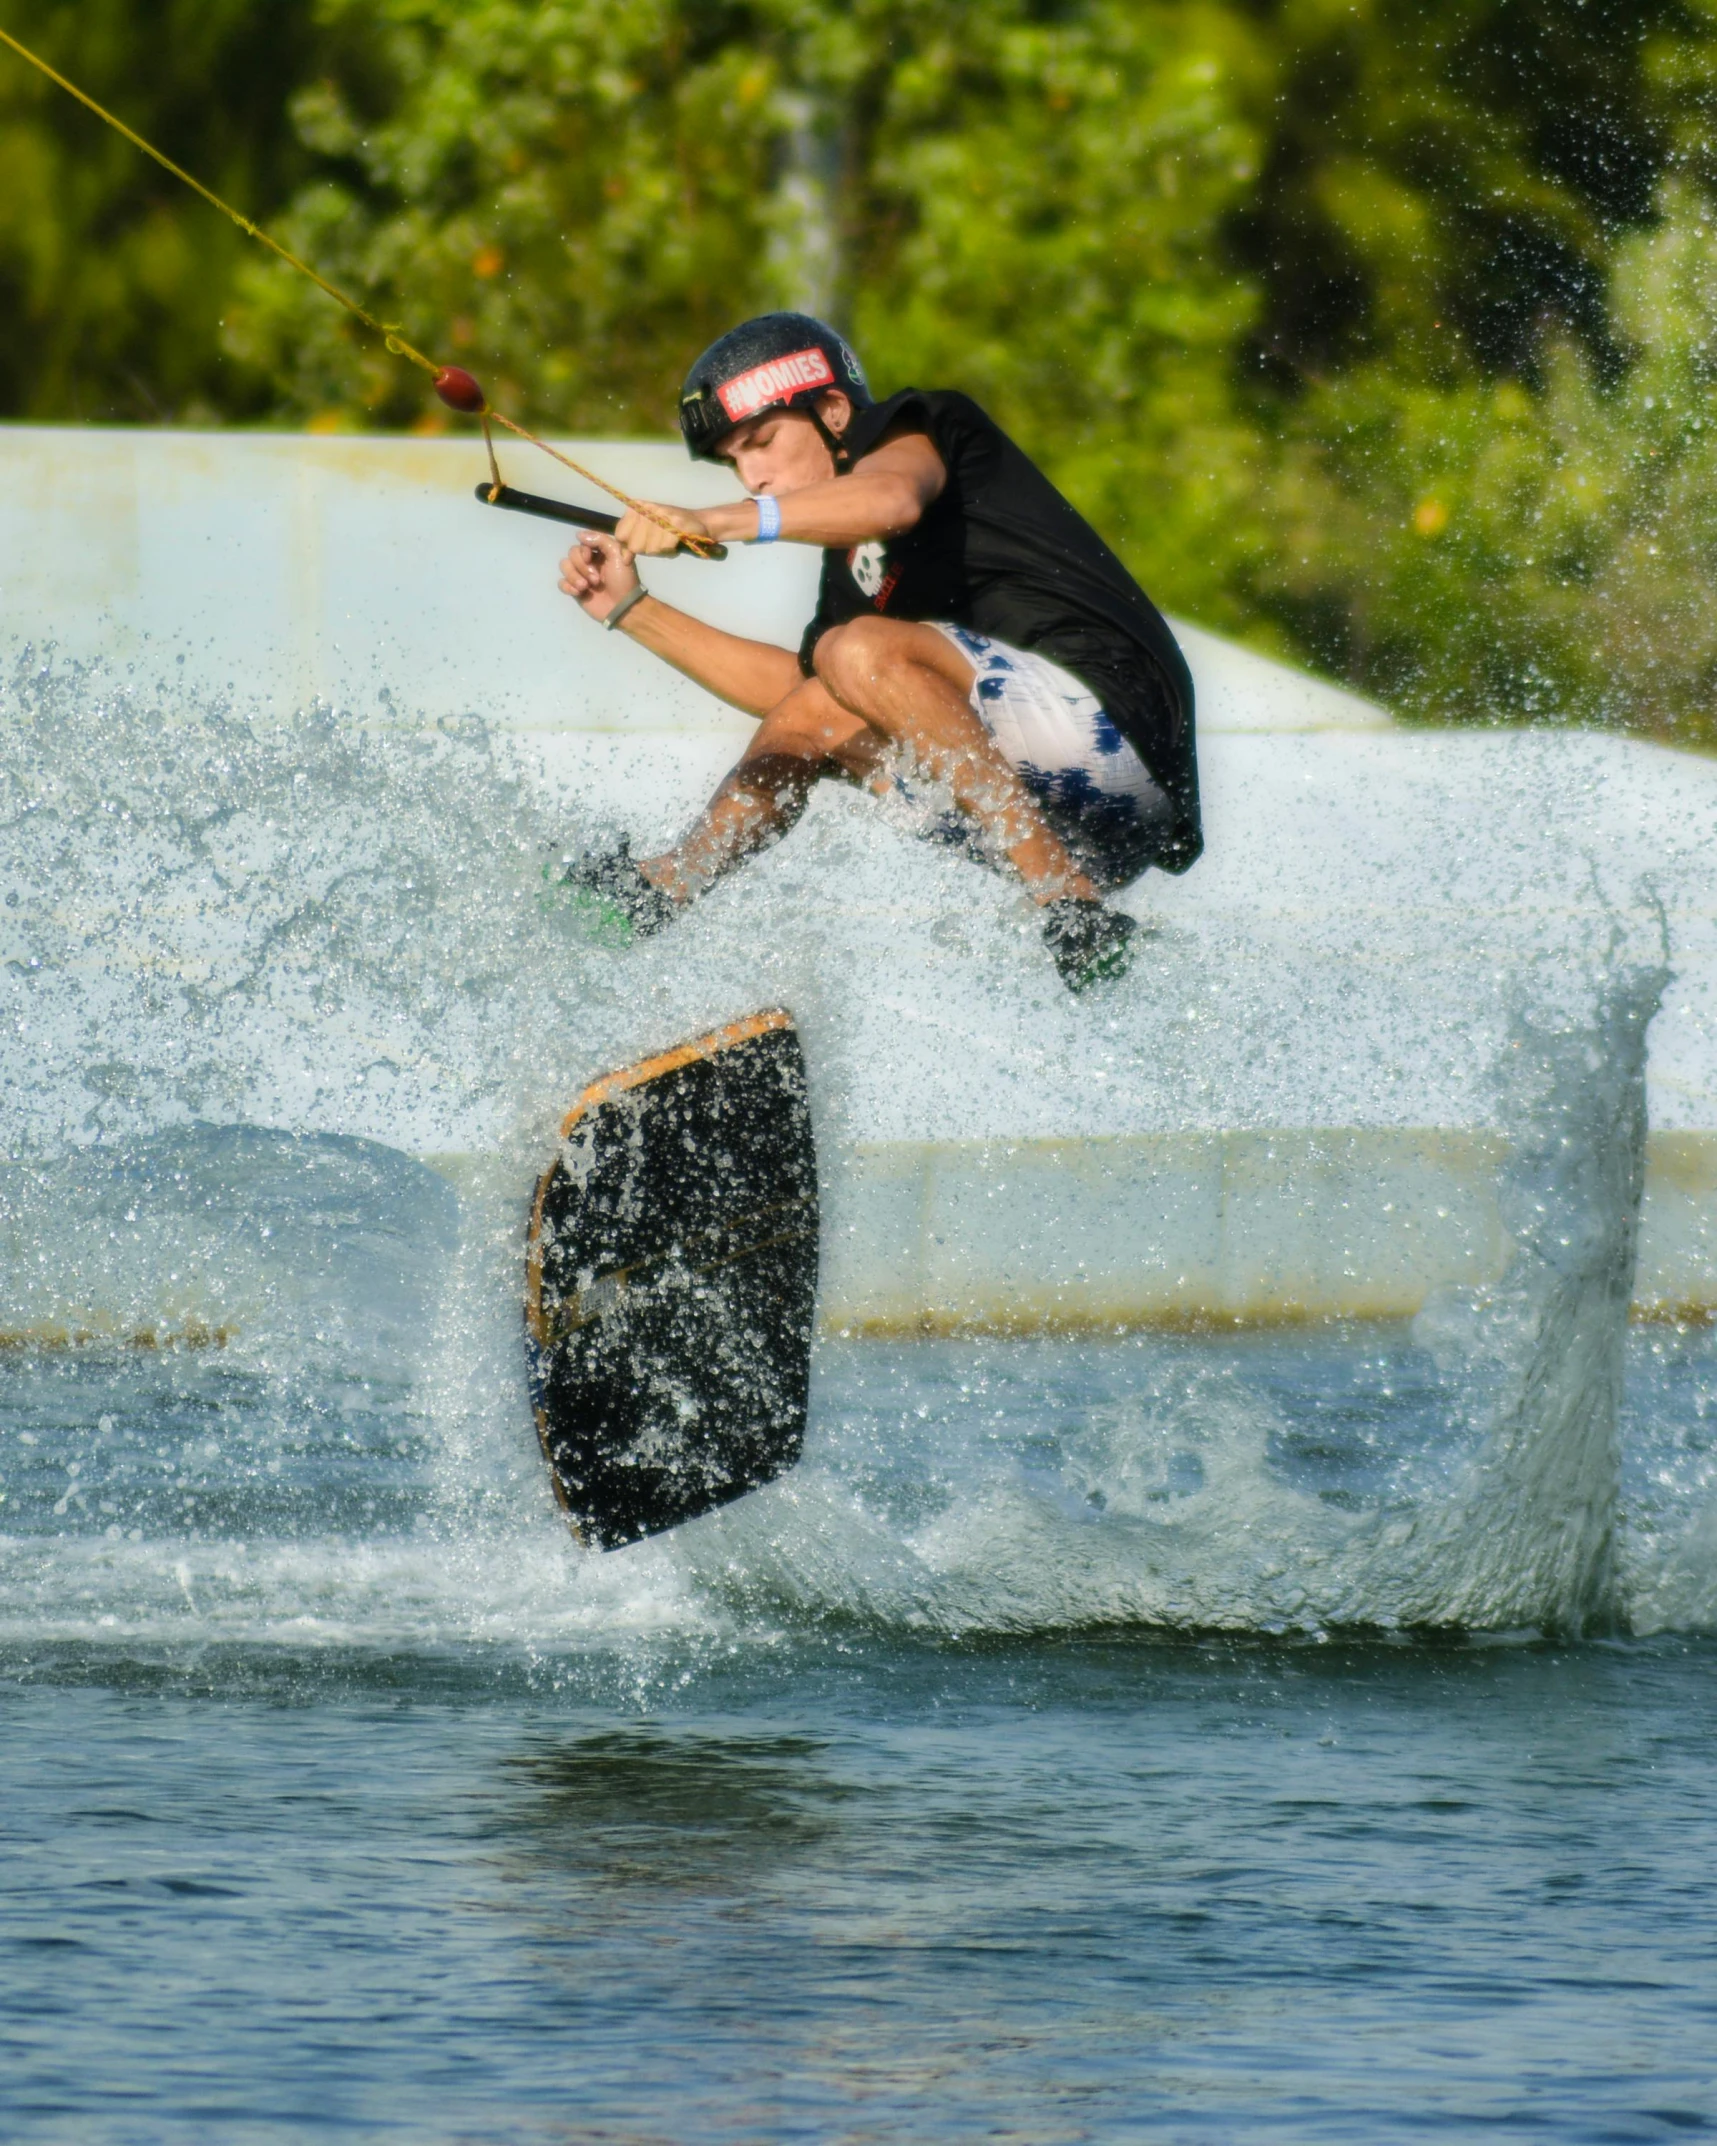 a wake boarder is going over a structure